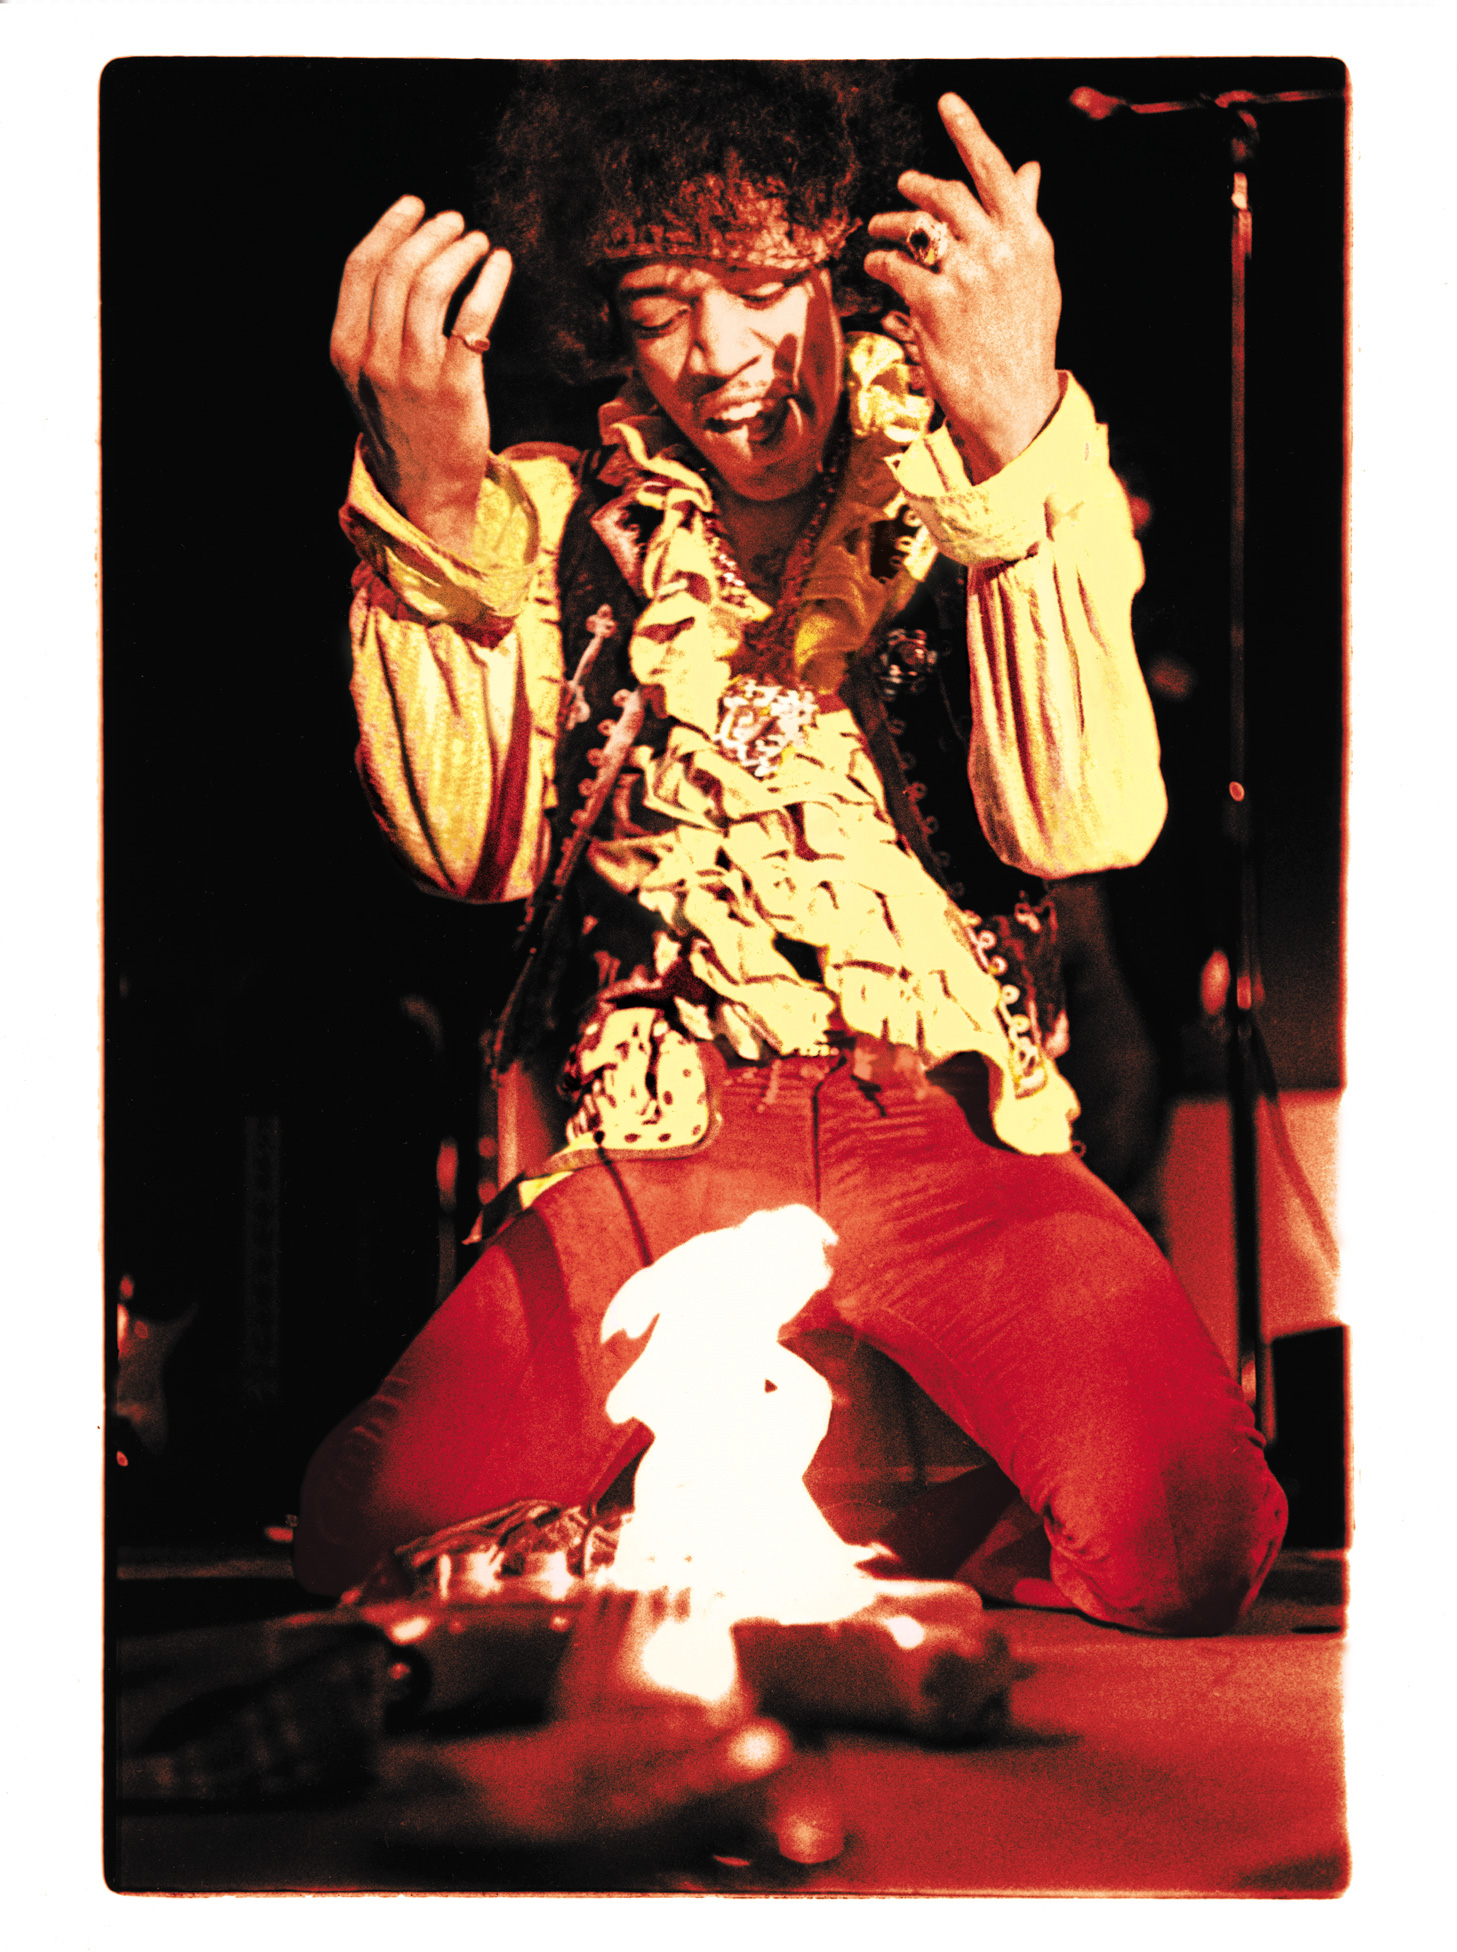 Ed Caraeff's photo of Jimi Hendrix burning his guitar at the Monterey International Pop Festival on June 18, 1967. Taken with a camera borrowed from his family optometrist when Caraeff was a high school junior, the photo made the cover of Rolling Stone, twice, in the decades since the festival.